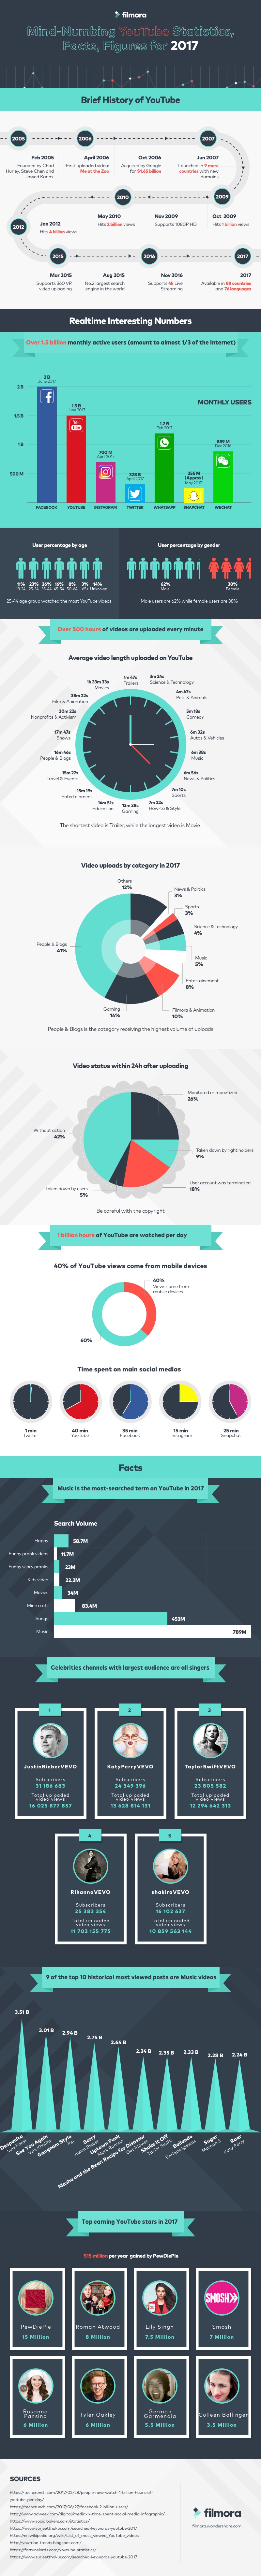 YouTube Facts Infographic, YouTube History